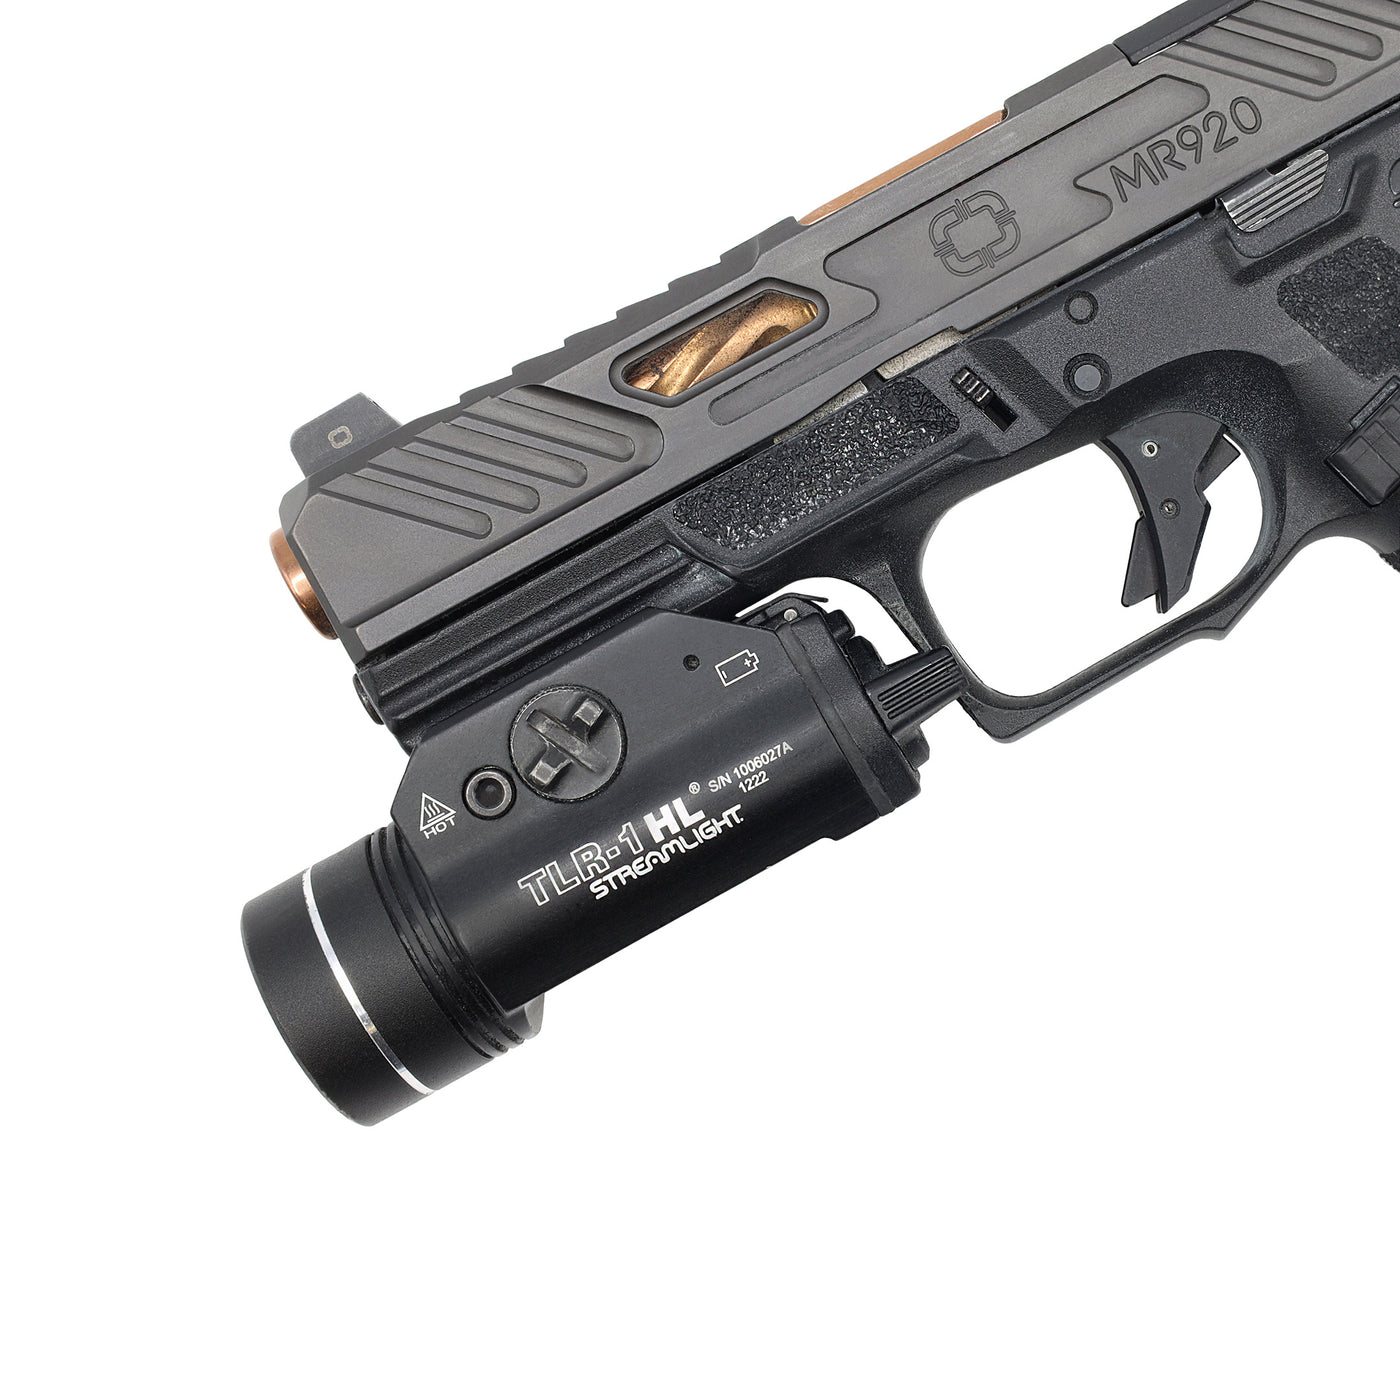 Shadow Systems MR920 with Streamlight TLR1 weapon light